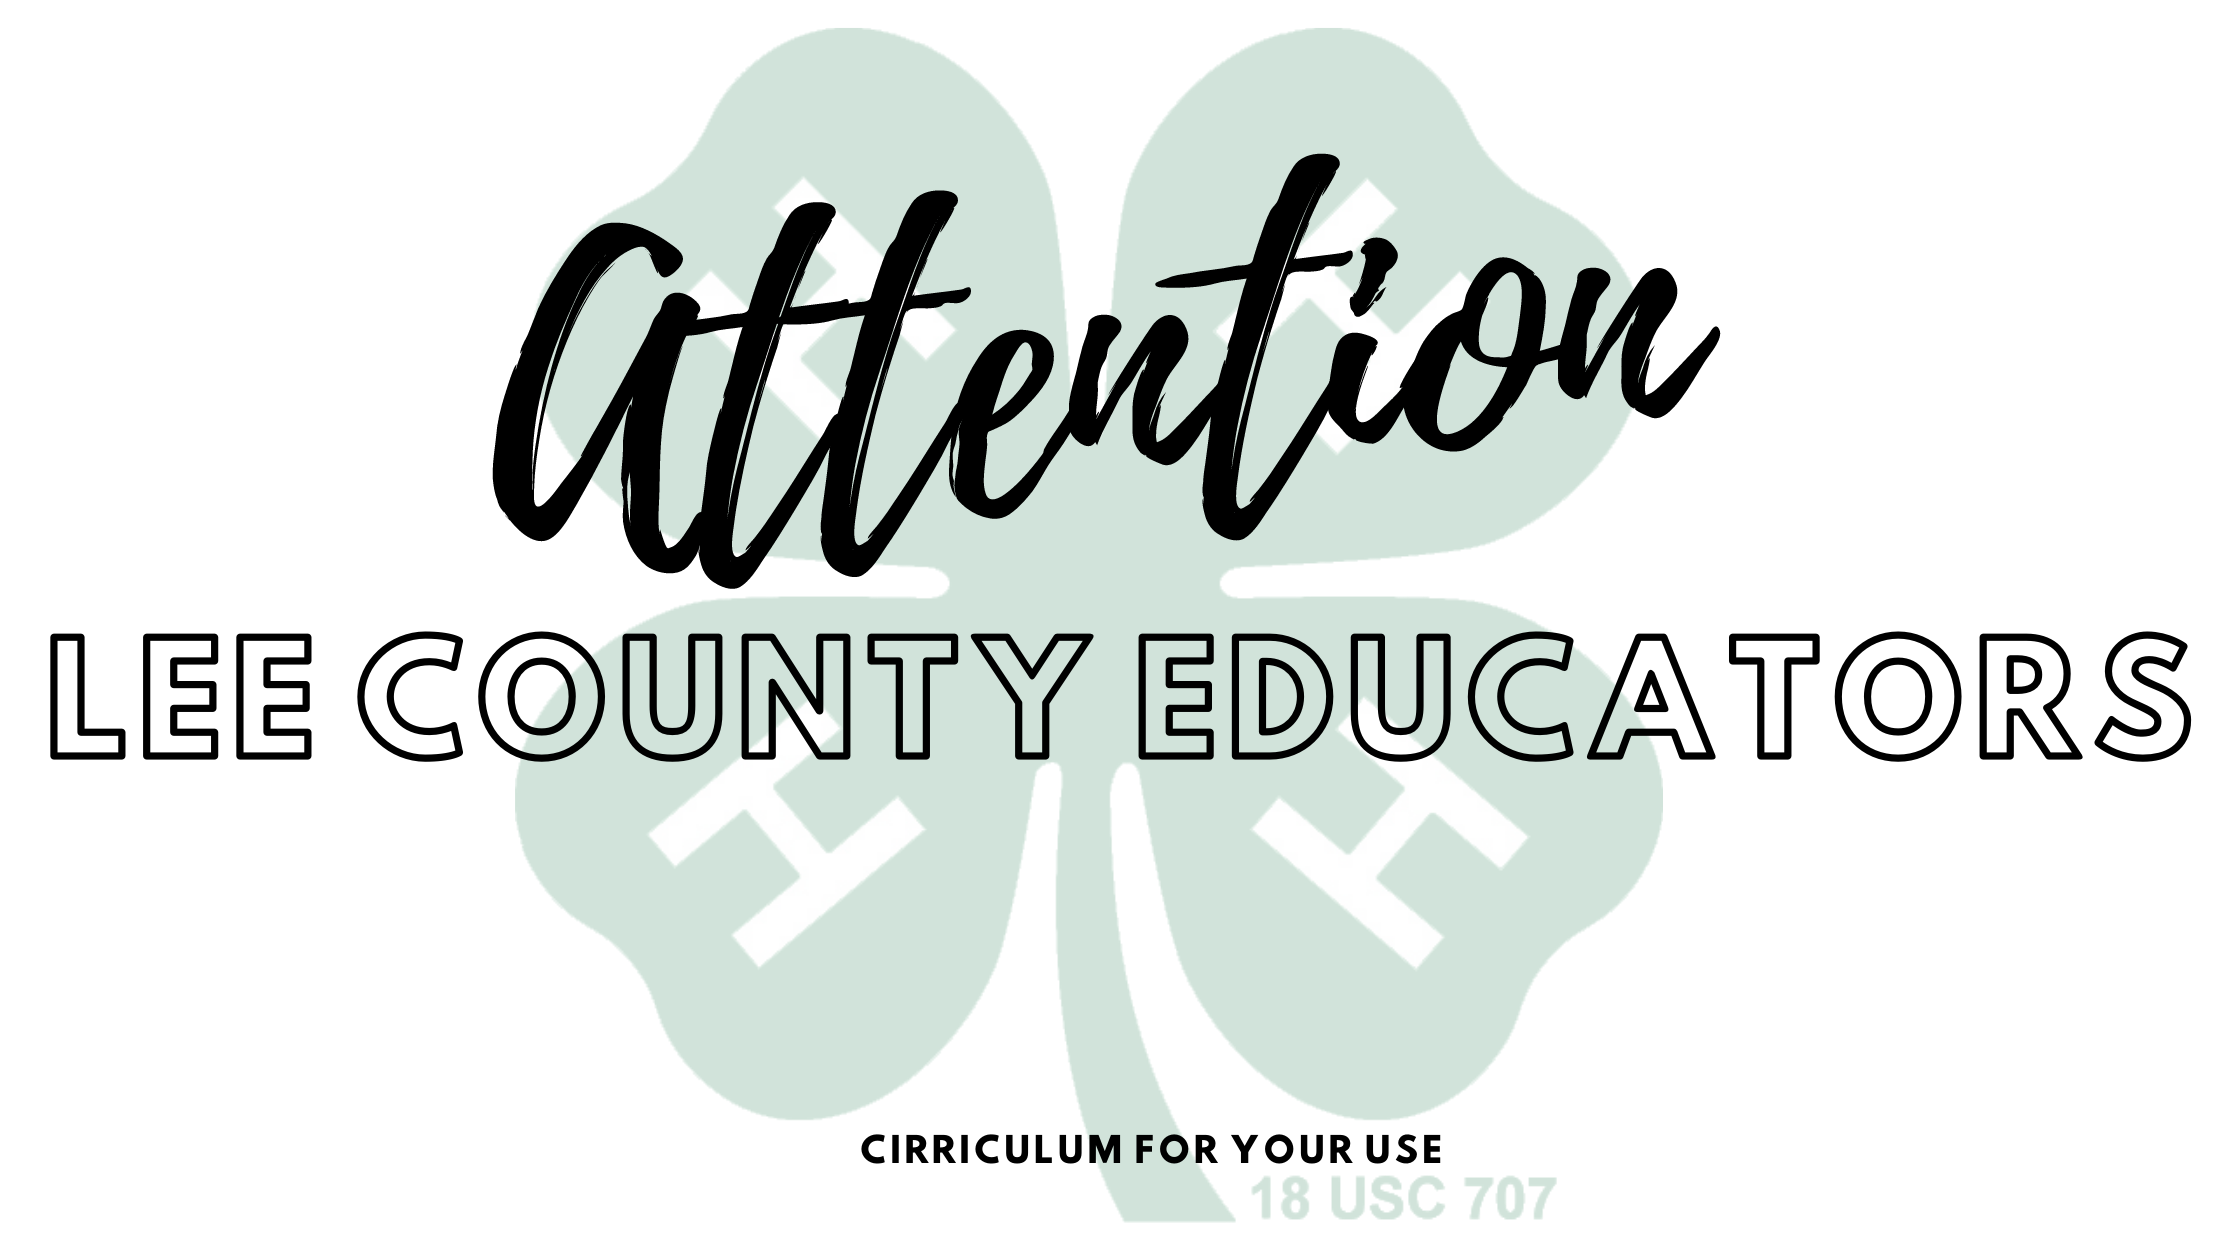 attention lee county educators